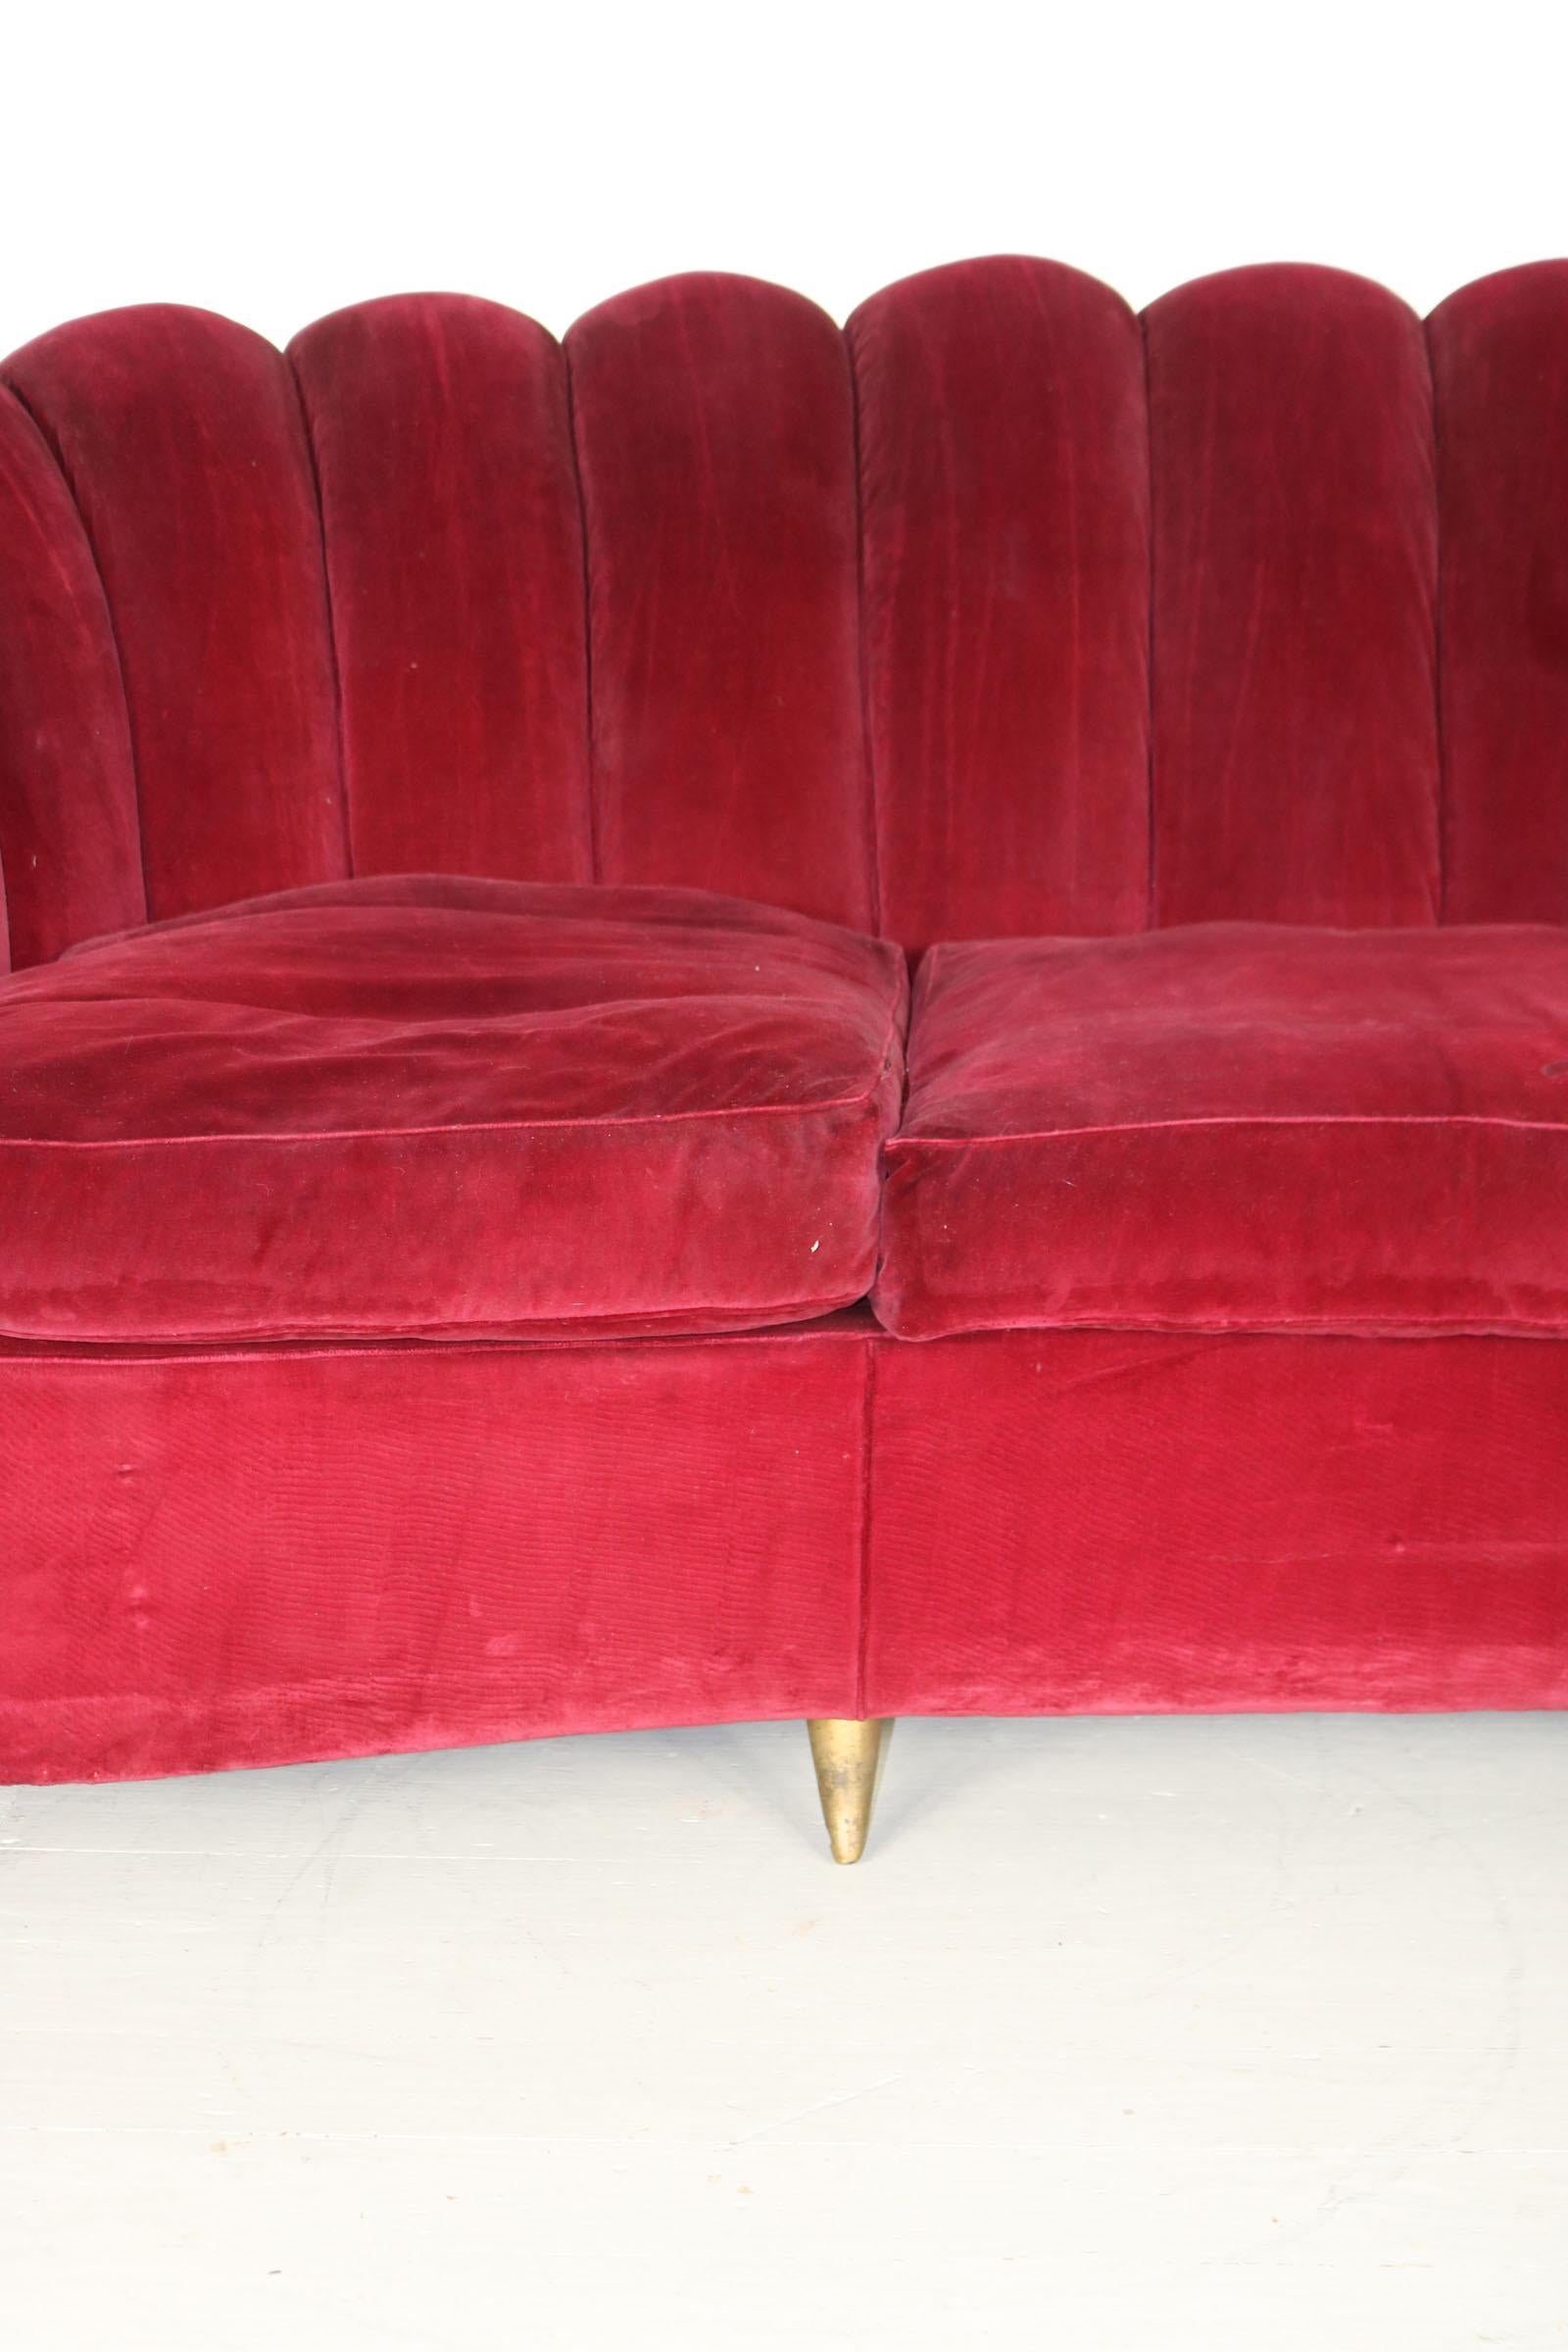 5 Piece Sofa Set for Reupholstering, Manufactured by Isa Bergamo in the 1950s For Sale 6